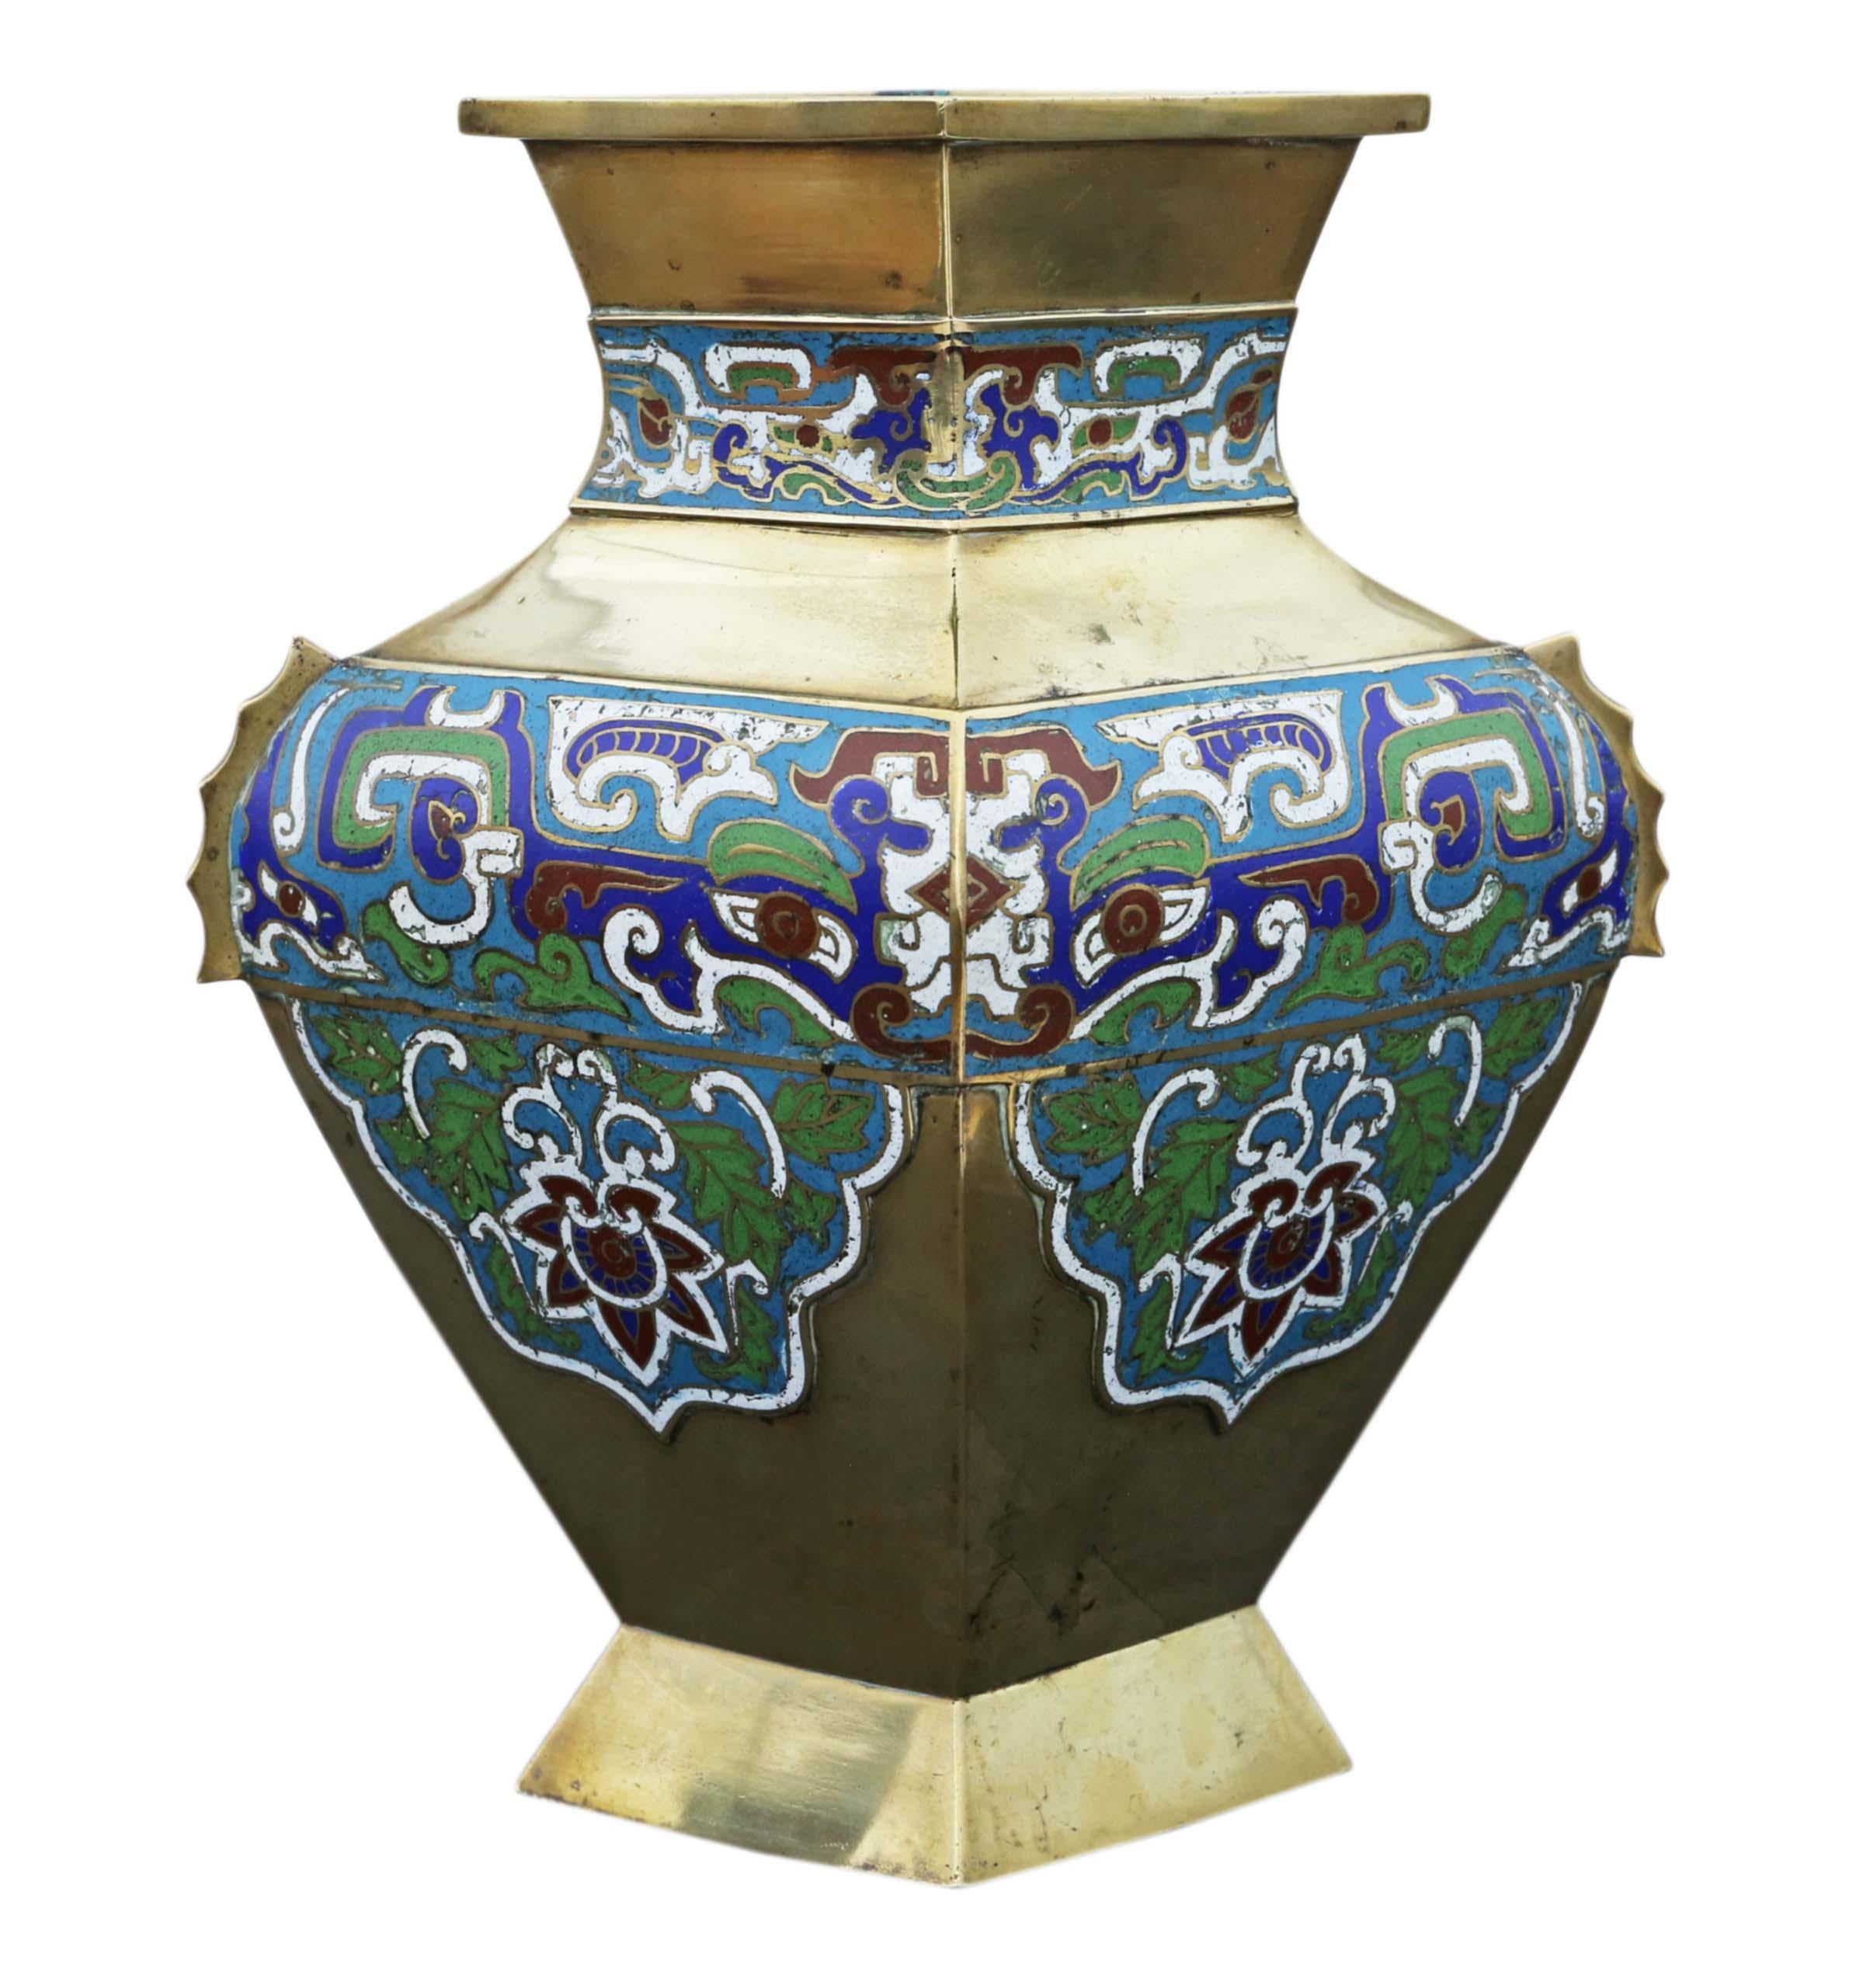 Antique large quality Chinese brass bronze Champleve enamel vase C1920. Four sided rhomboidal form.

Would look amazing in the right location. Rare large size and design.

Overall maximum dimensions: 31cmH x 26cm x 20cm. Weighs 2.6Kg.

In good